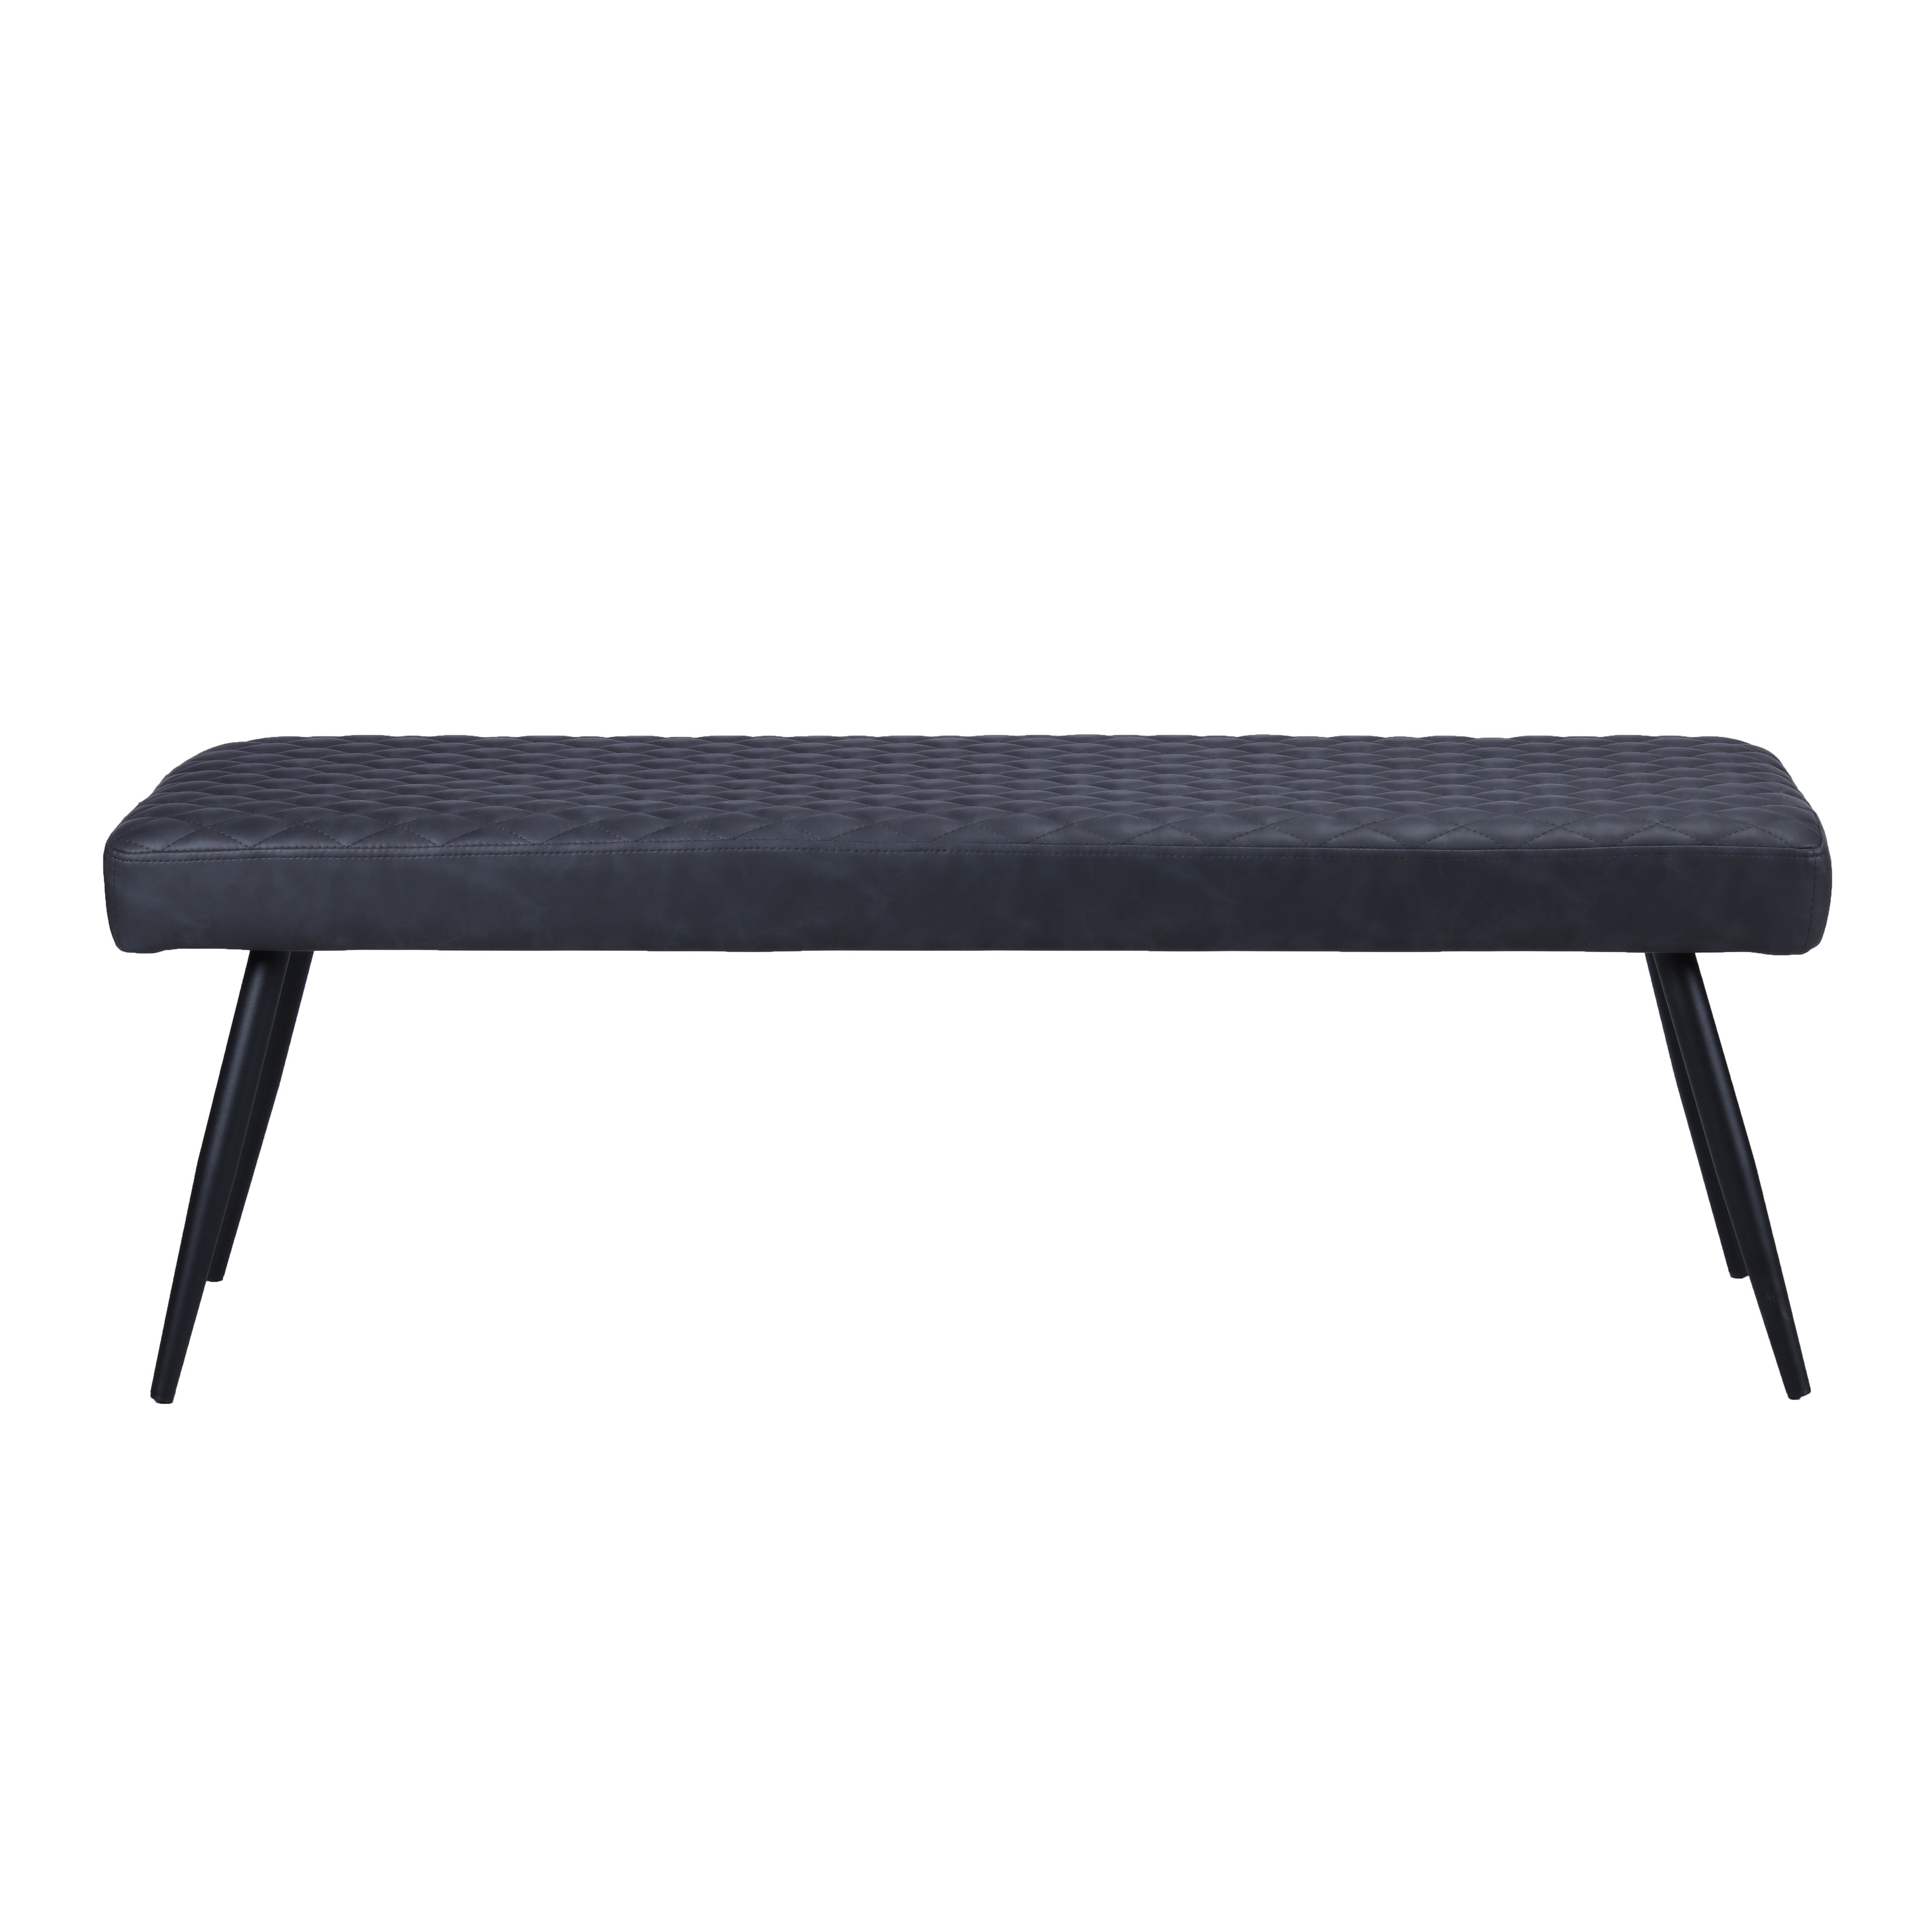 Montreal 2 Seater Dining Bench Faux Leather Black